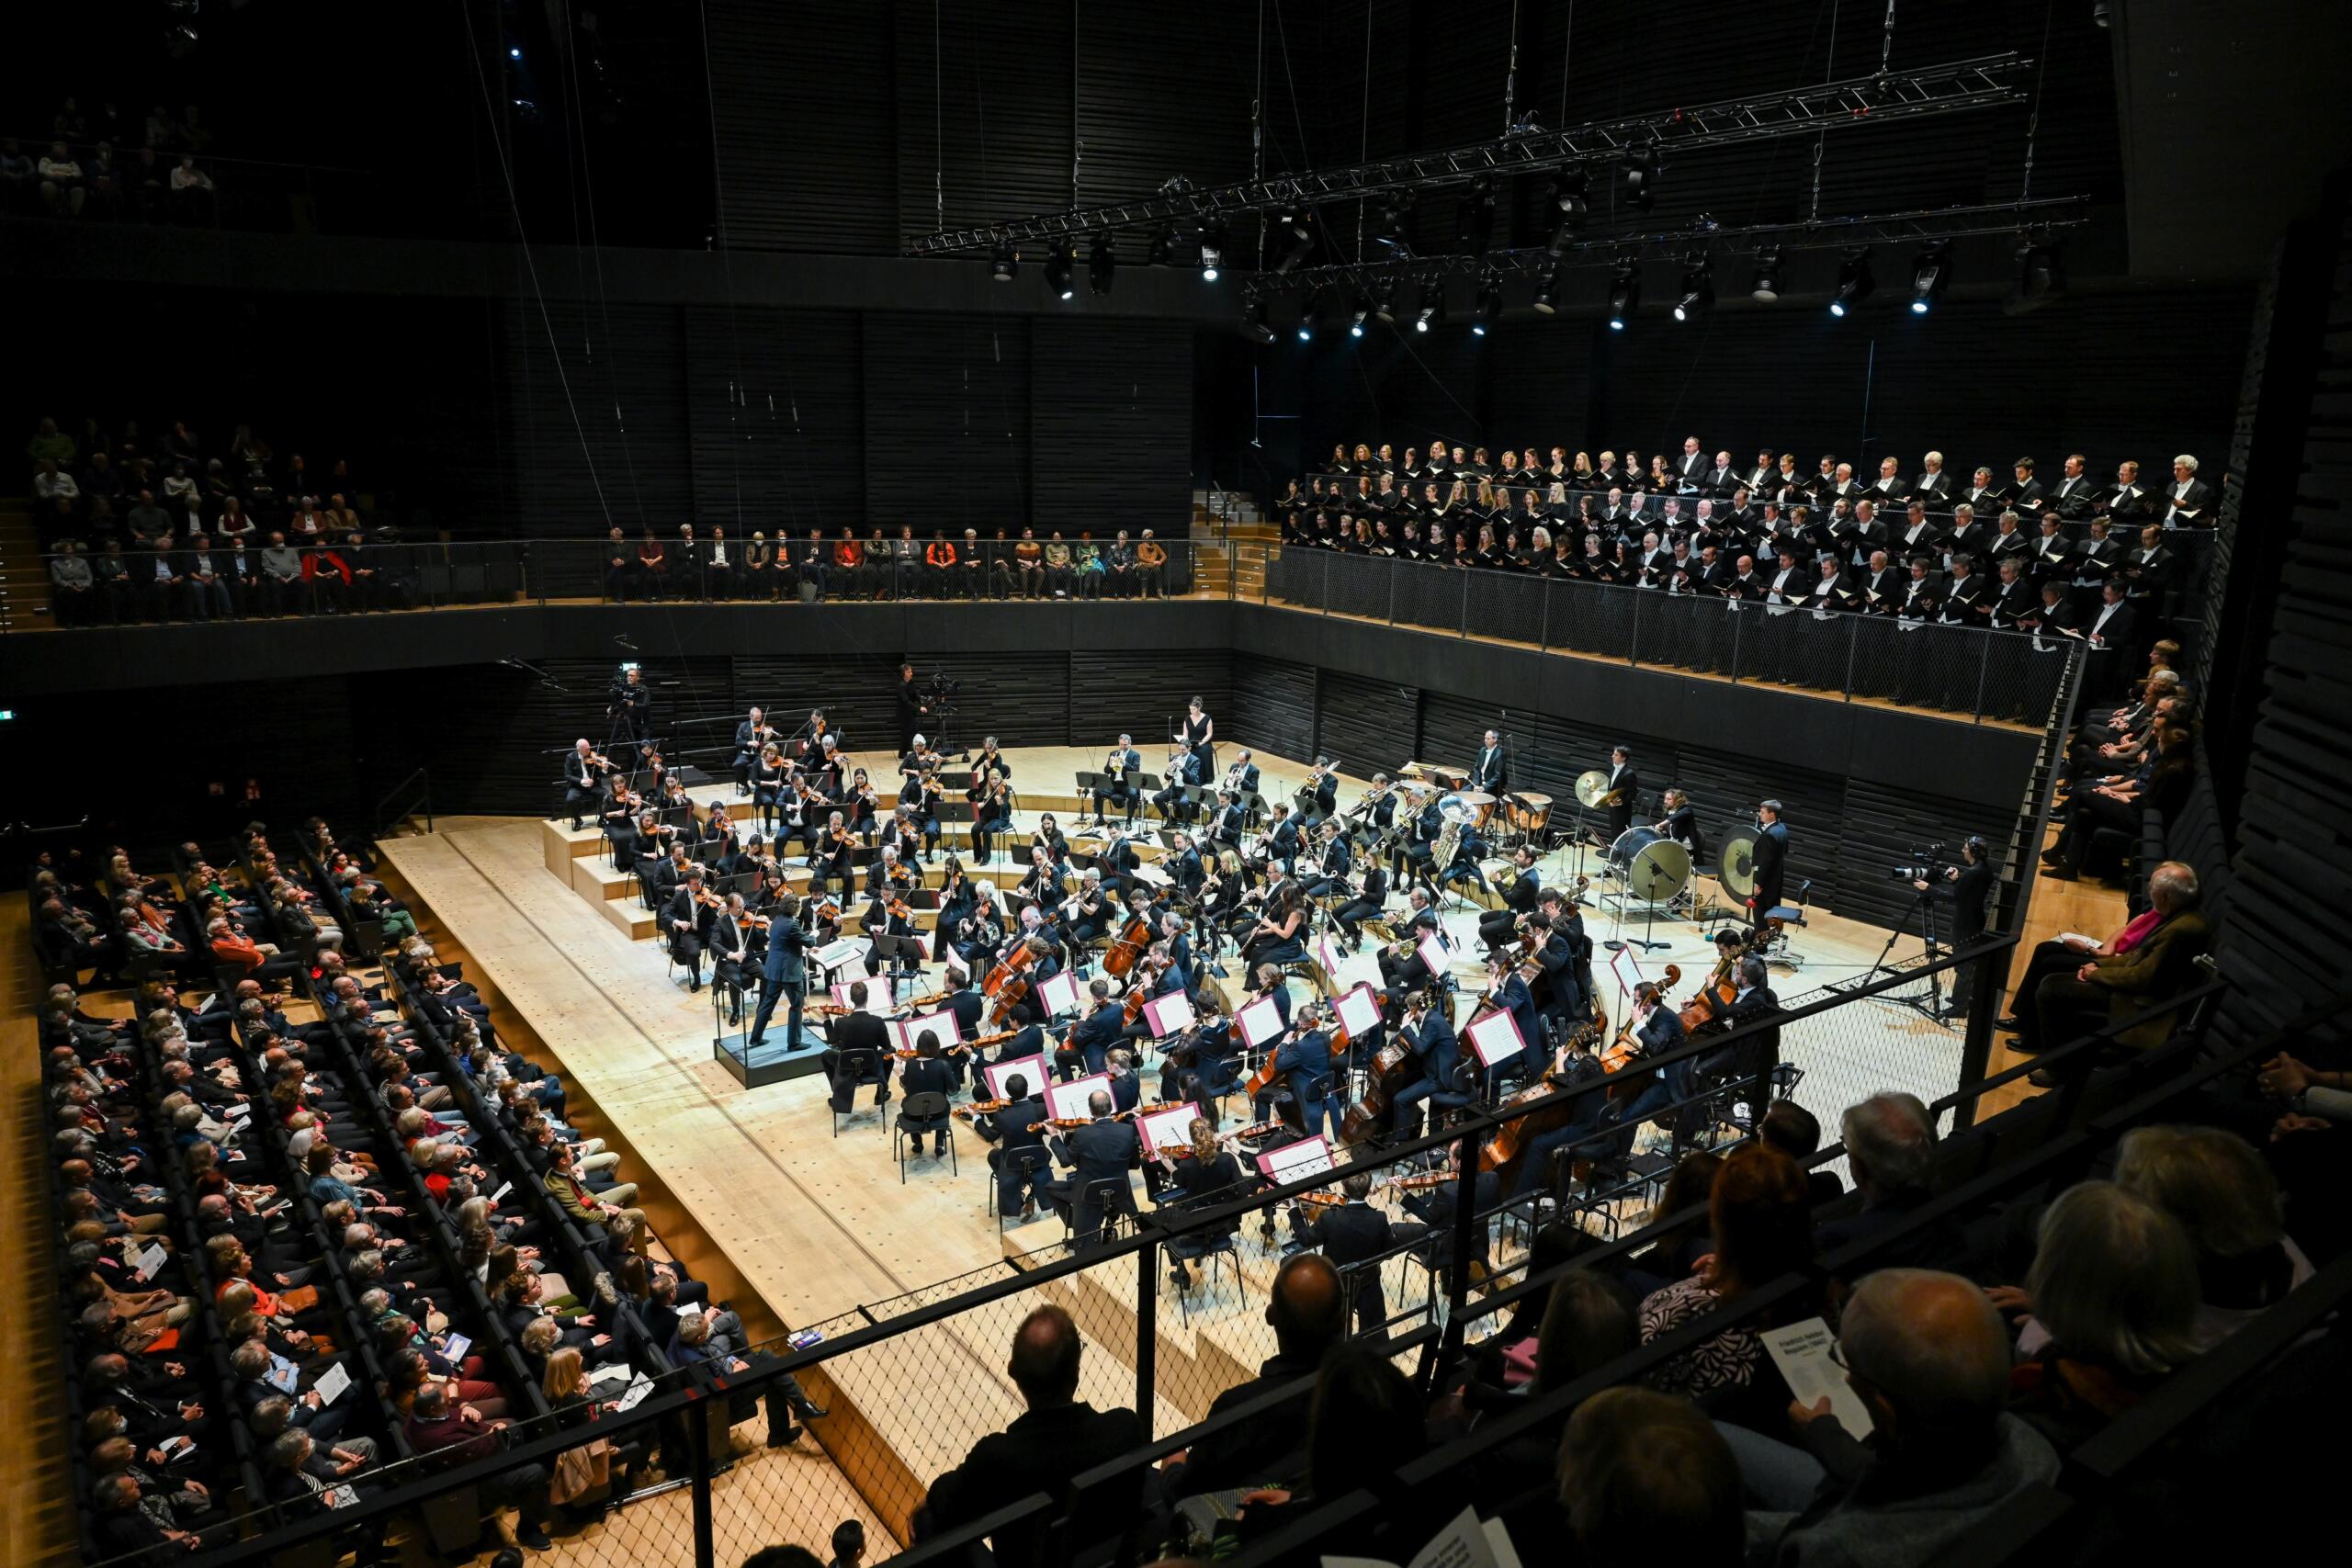 The Munich Philharmonic Orchestra sits on the stage of the Isarphilharmonie.